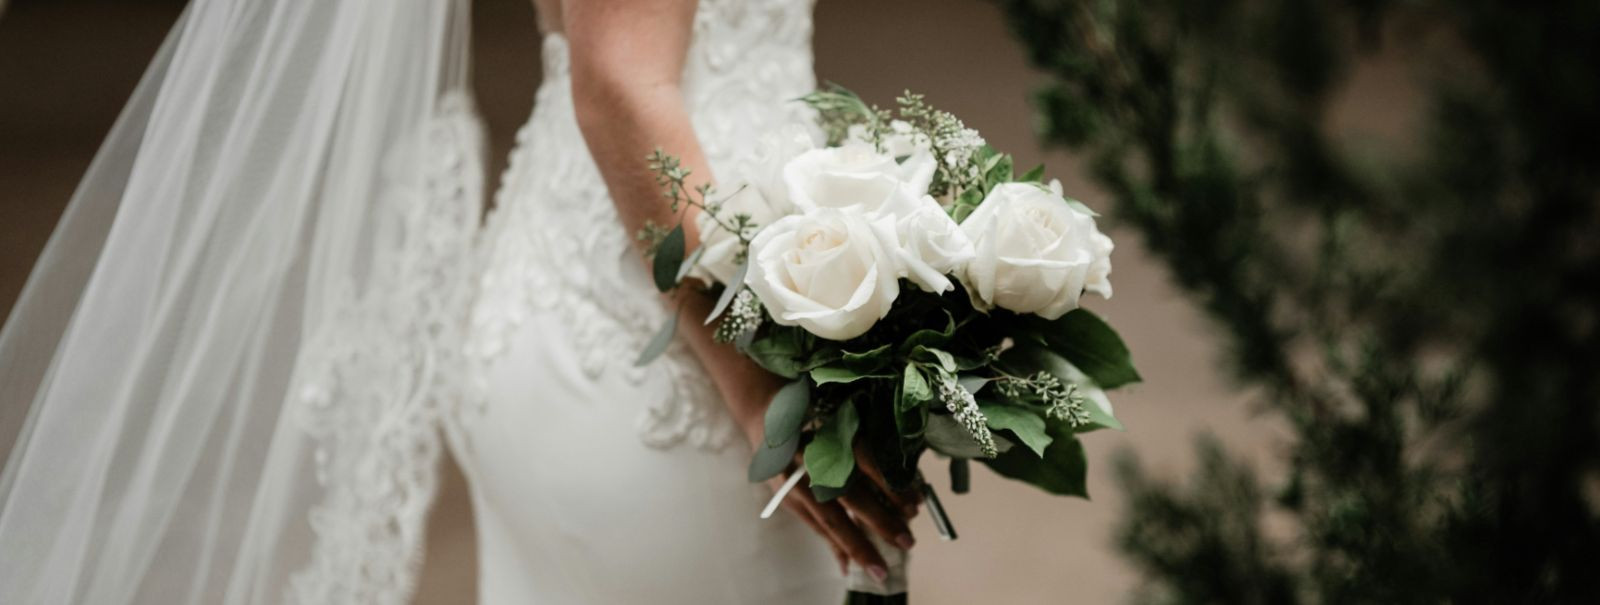 The wedding bouquet is not just a collection of flowers; it's a bride's most personal and expressive accessory on her special day. It reflects her style, the we